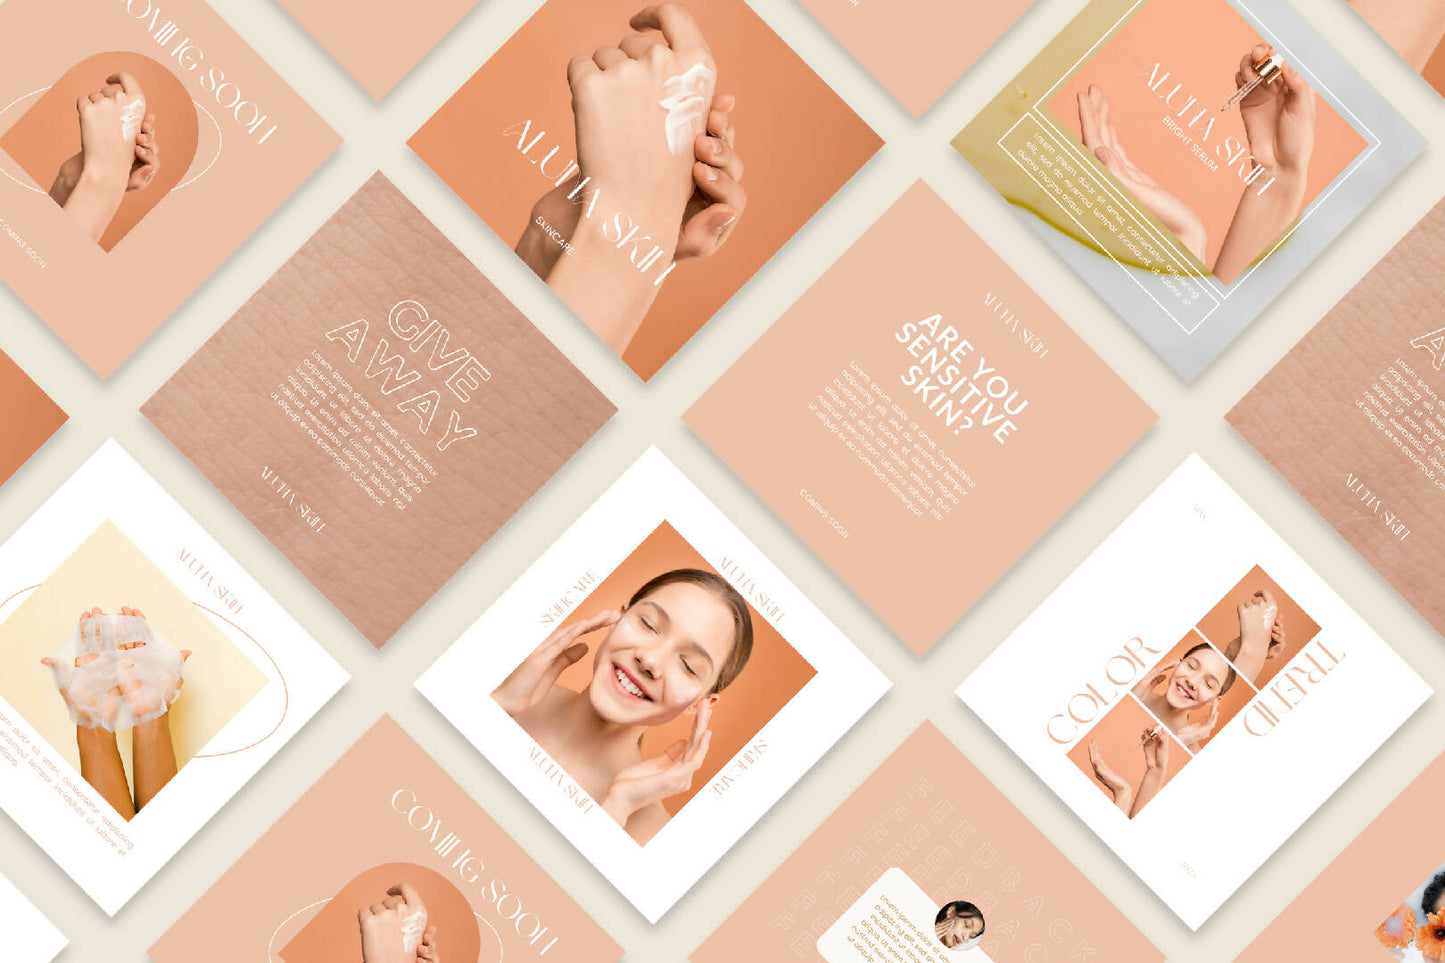 Skincare Template for Instagram - Editable with Canva